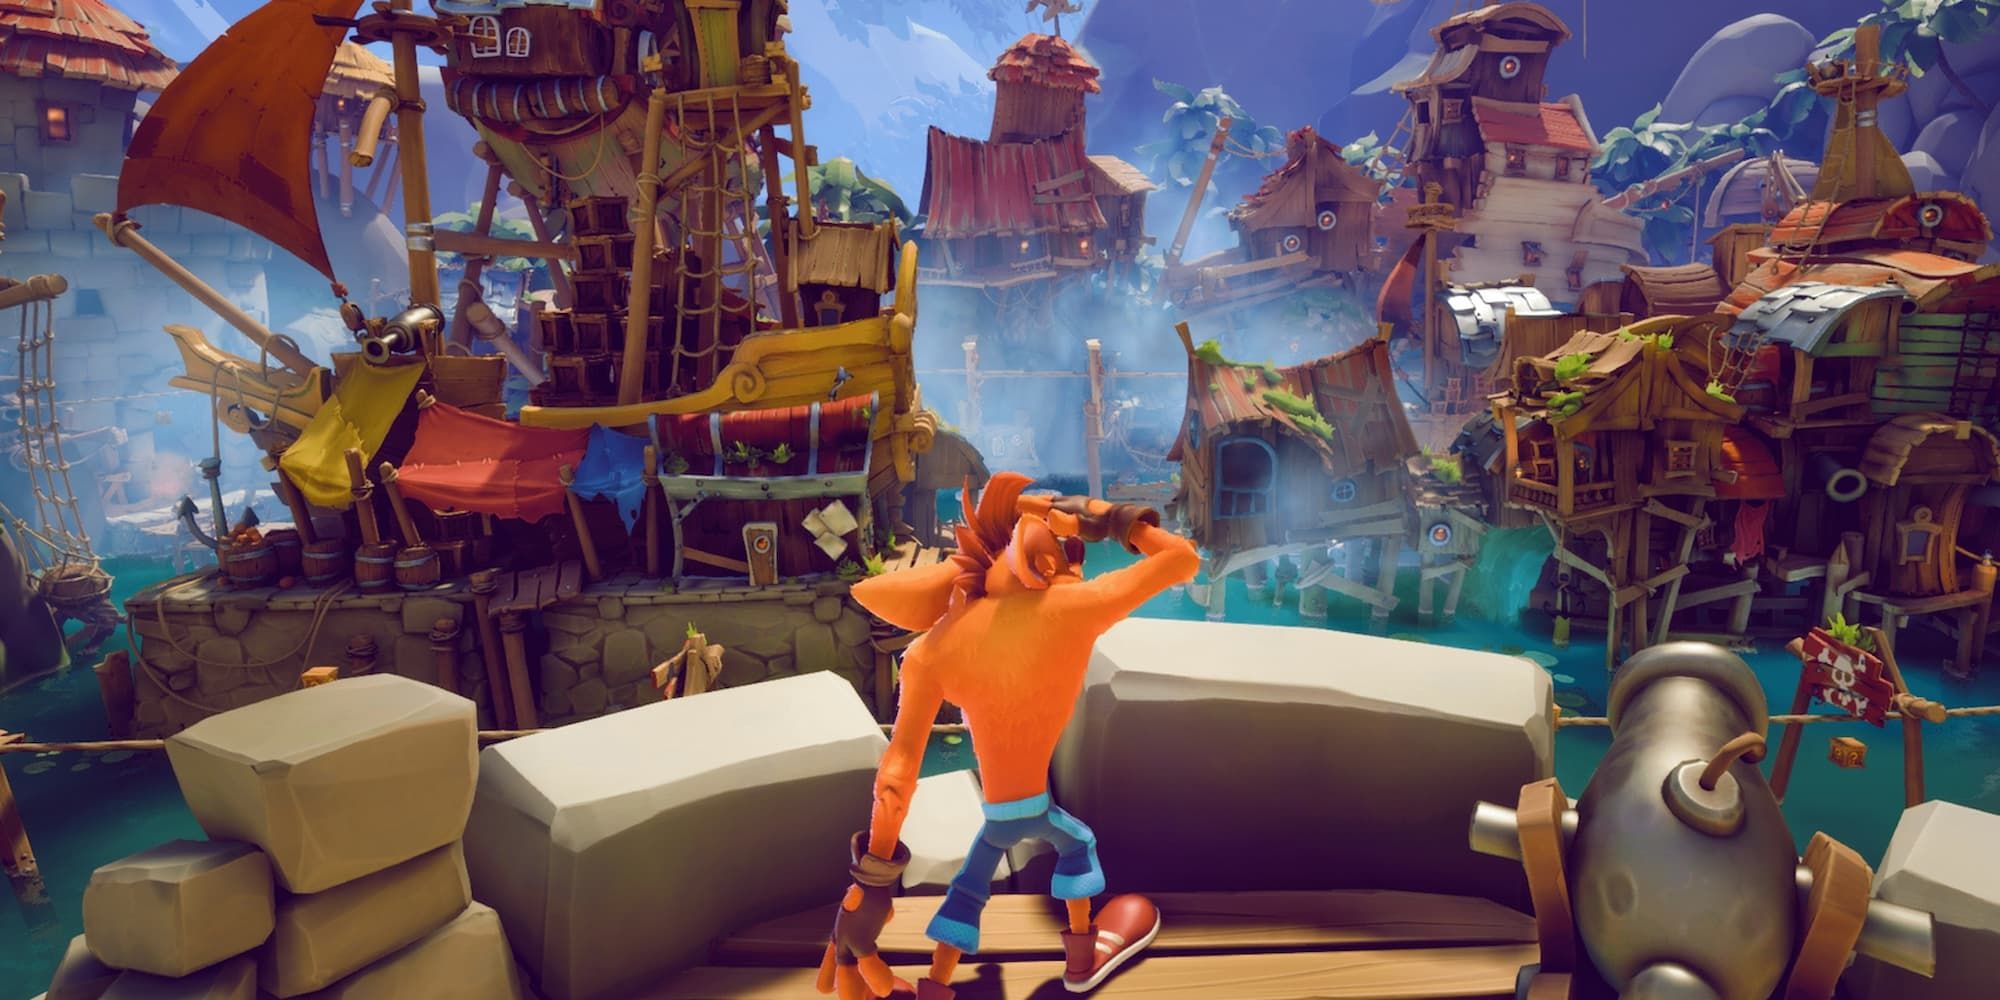 Crash Bandicoot overlooks a city of pirate ships in the bay in Crash Bandicoot 4: It's High Time.